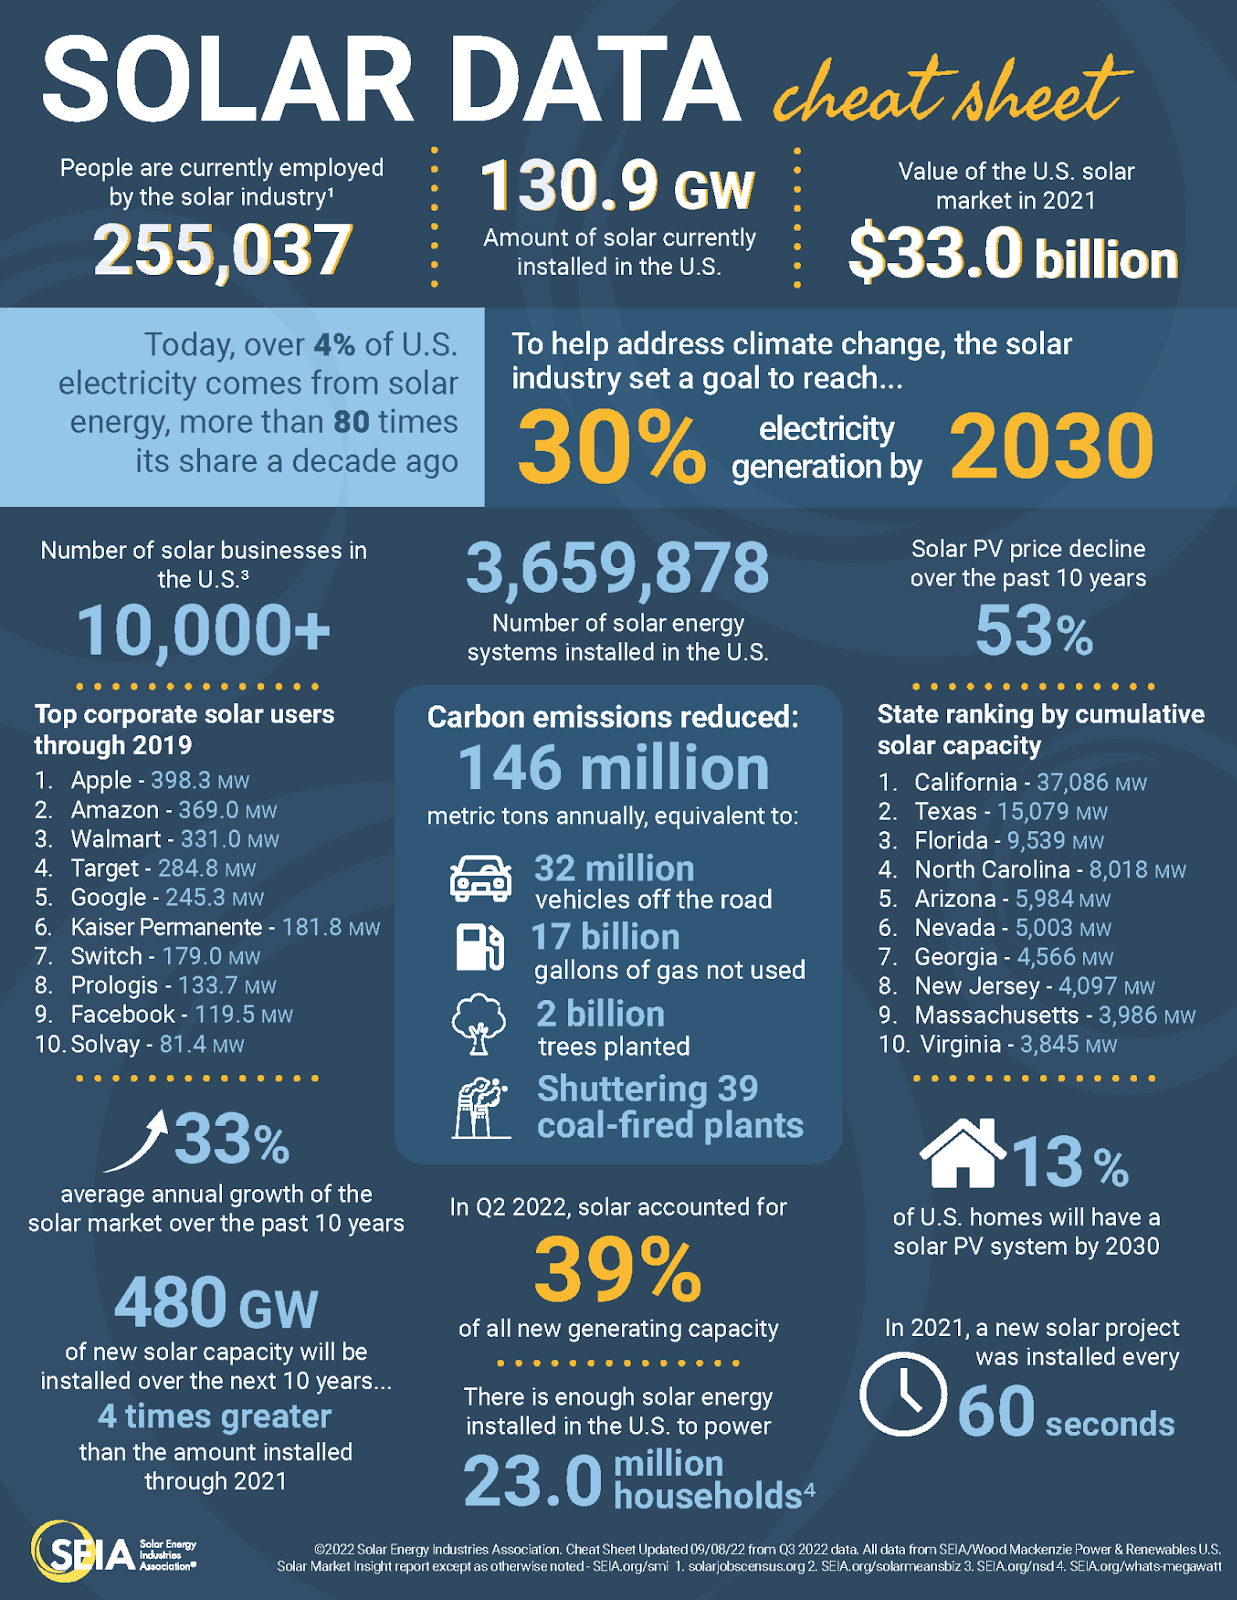 Infographic of solar data statistics. 255037 people are currently employed by the sola industry. 130.9 GW of solar energy installed in the US. $33.0 billion value of US solar market in 2021. Today, over 4% of U.S electricity comes from solar energy, more than 80 times its share a decade ago. To help address climate change, the solar industry set a goal to reach 30% electricity generation by 2030. 13% of U.S homes will have a solar PV system by 2030. In 2021, a new solar project was installed every 60 seconds